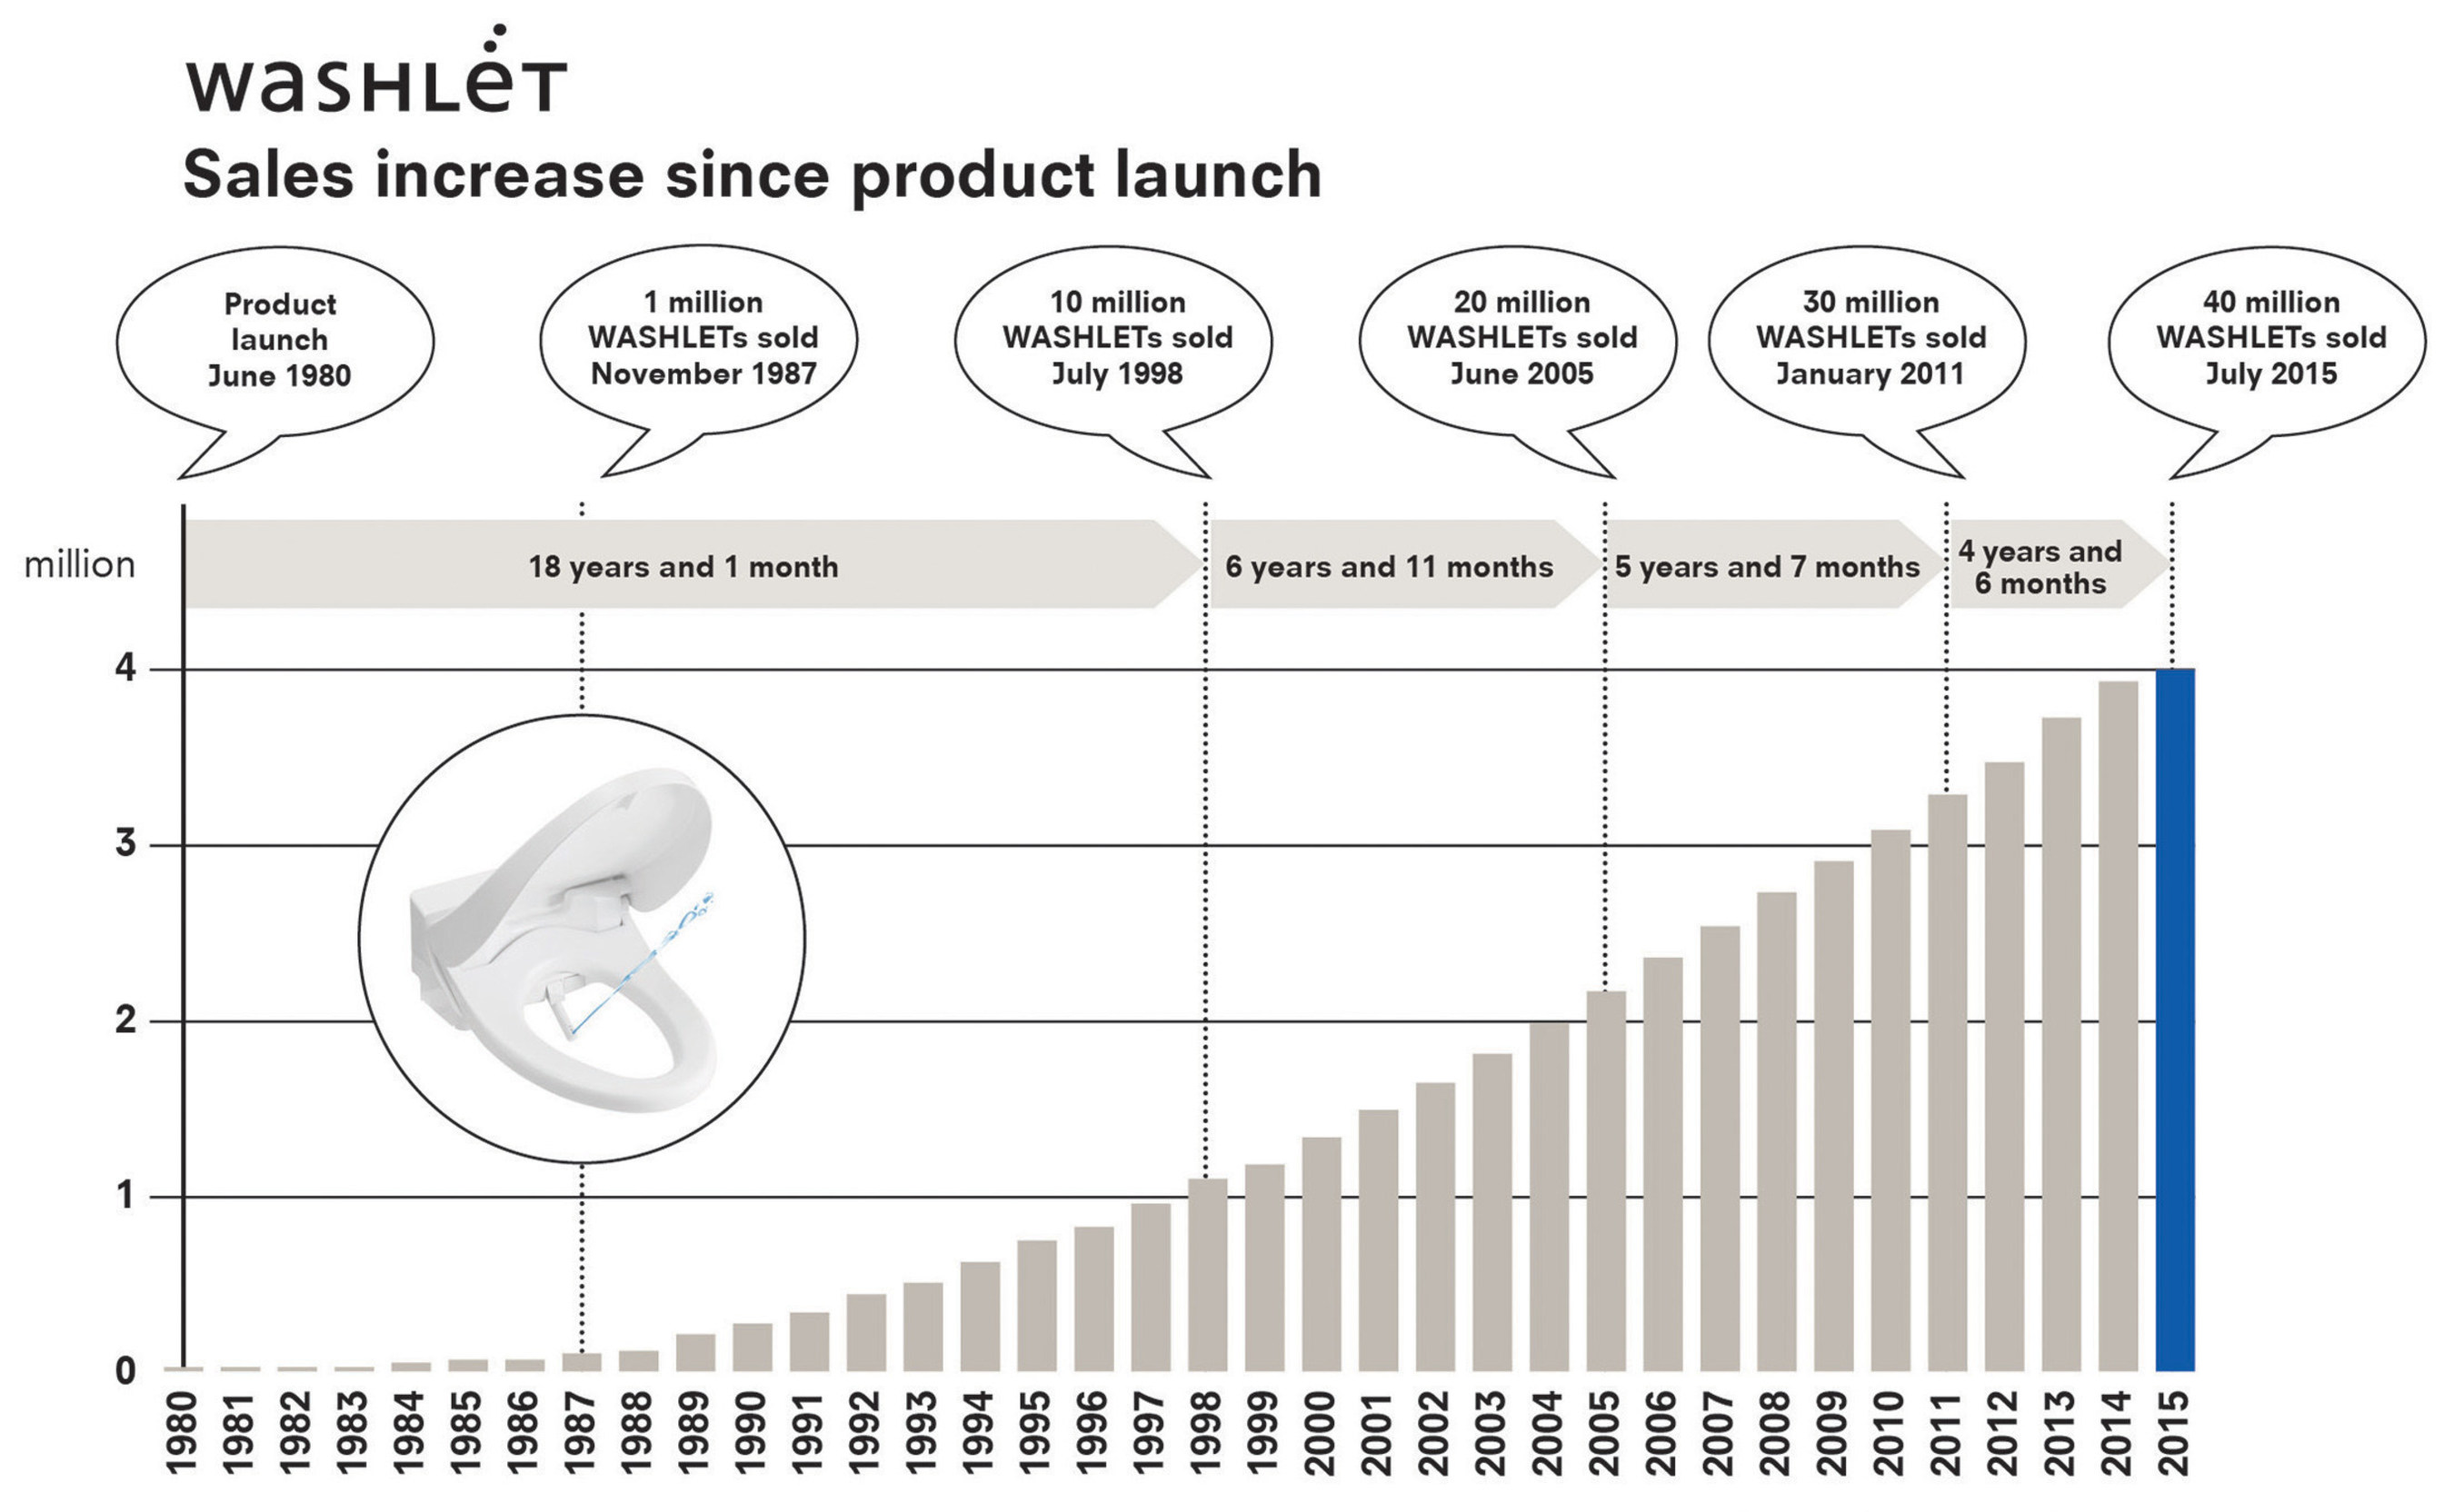 TOTO has sold more than 40 million Washlets worldwide since 1980, exemplifying the company's position as the plumbing industry's leader in technological innovation. Today, Washlets are found in 77.5 percent of Japanese homes and demand continues to grow dramatically in North America. If this trend continues, Washlets may become standard here in the next decade.